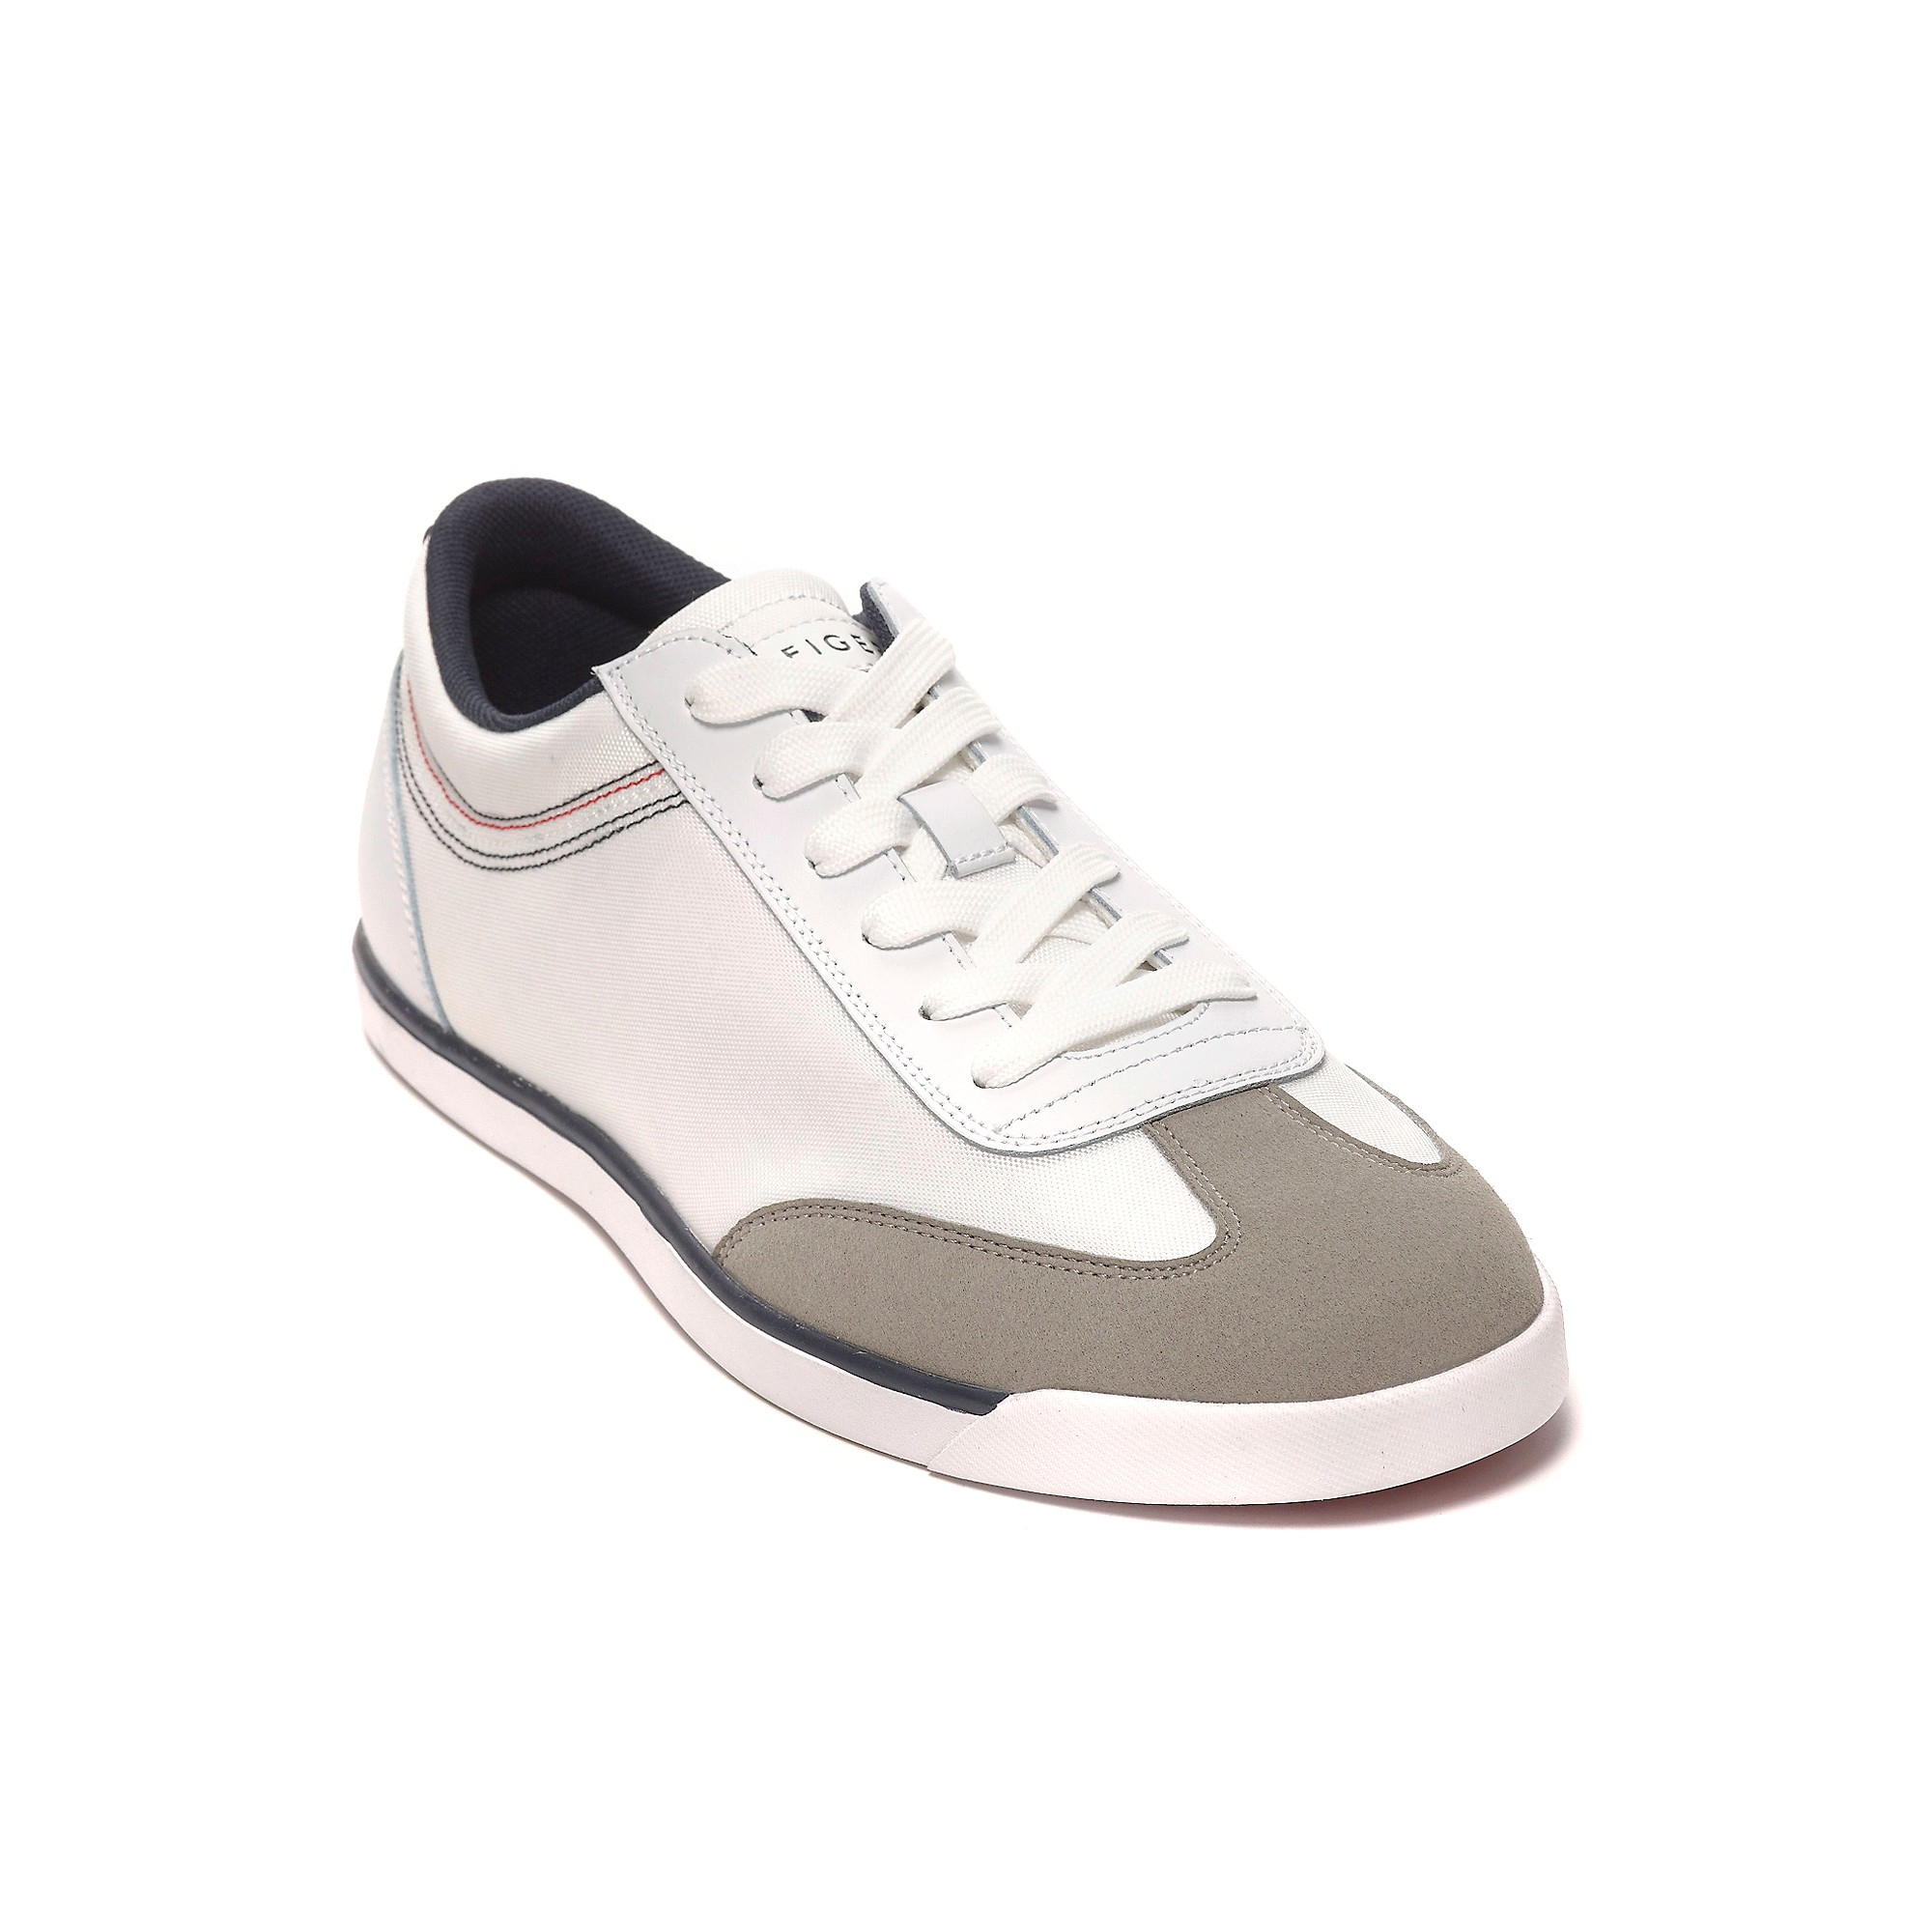 Tommy hilfiger Tennis Sneaker in White for Men (WHITE/TH LT GREY/TH ...